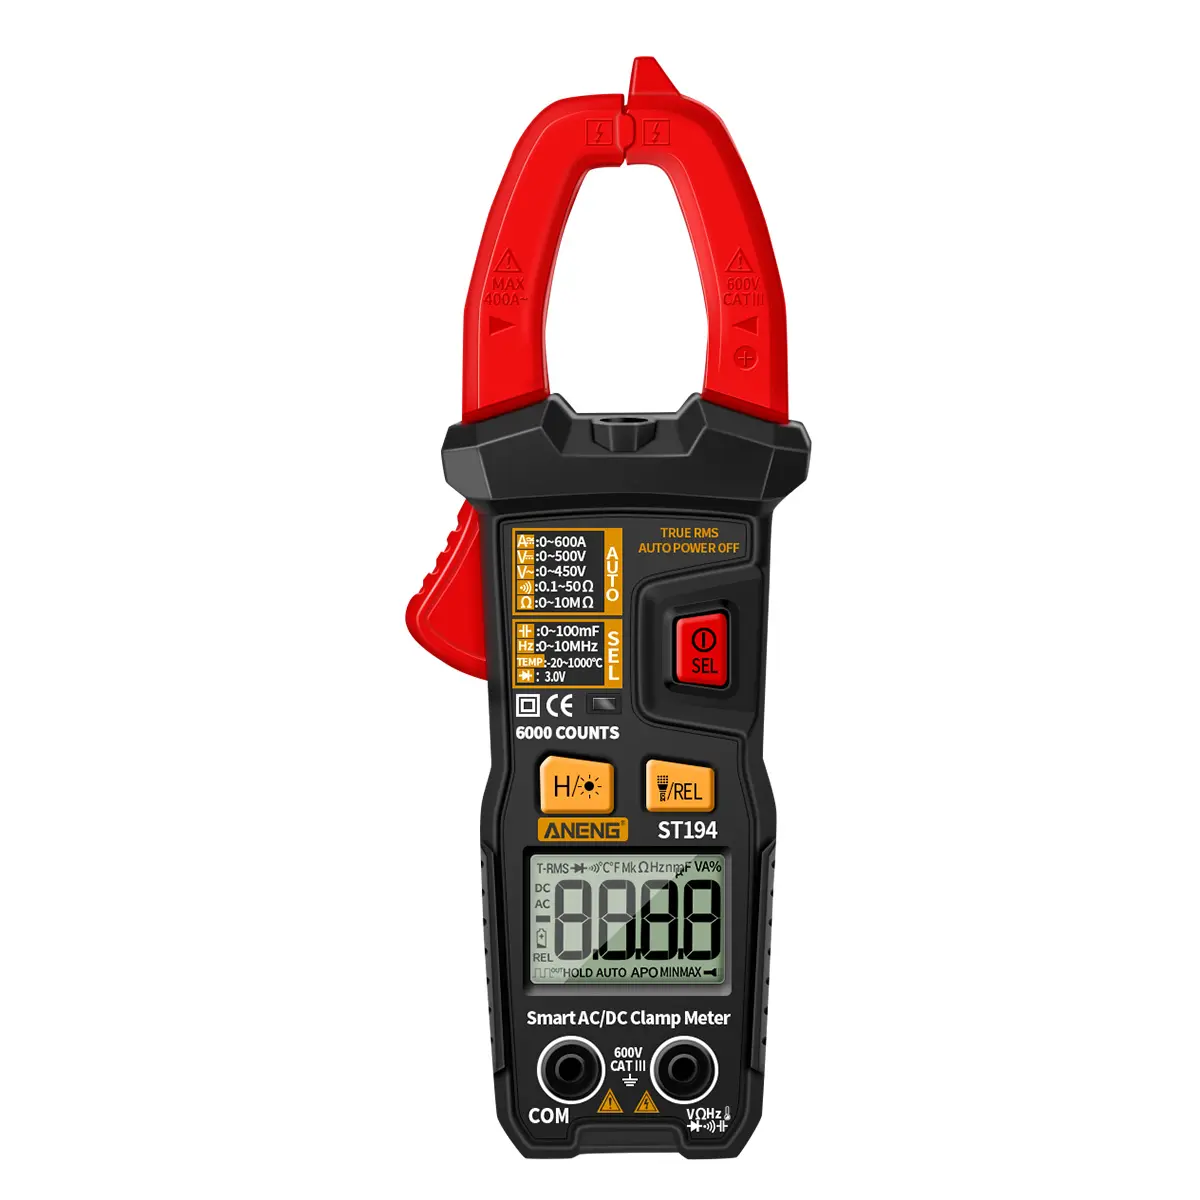 ANENG ST194 Digital 6000 Count True RMS Multimeter Clamp Meter DC/AC Current Clamp Voltage Car Tester Hz Capacitance Ohm Tool